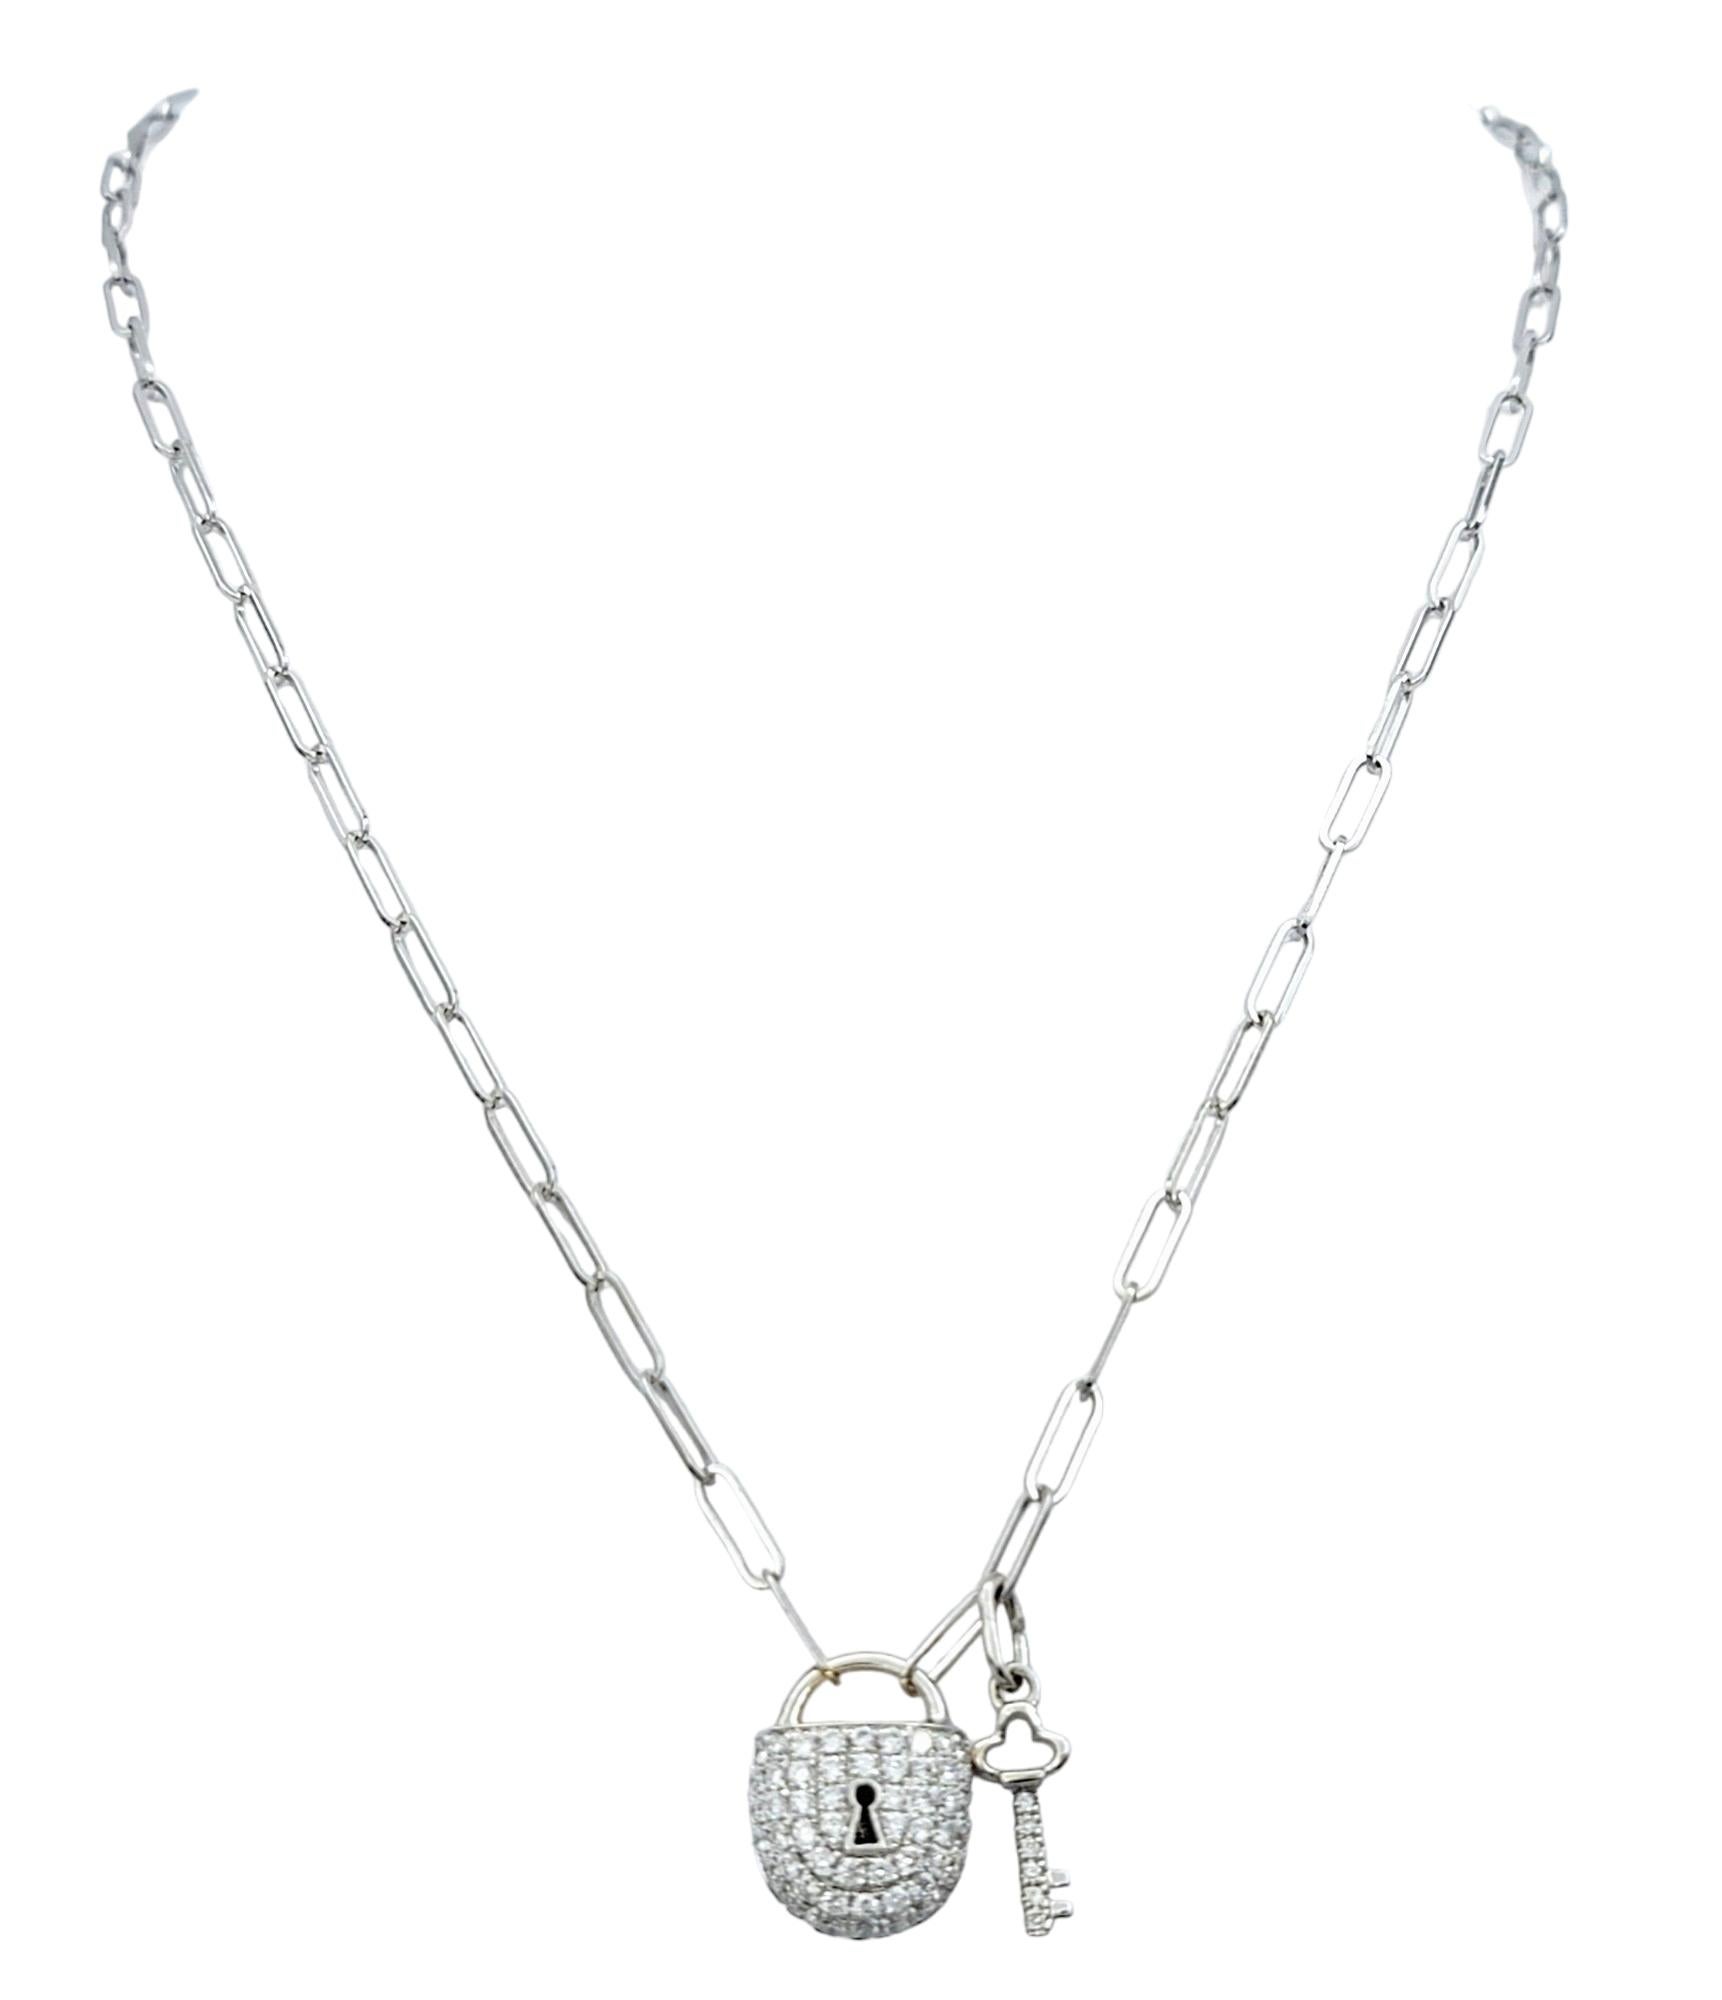 Contemporary Lock and Key Round Pave Diamond Charm Necklace Set in 18 Karat White Gold For Sale